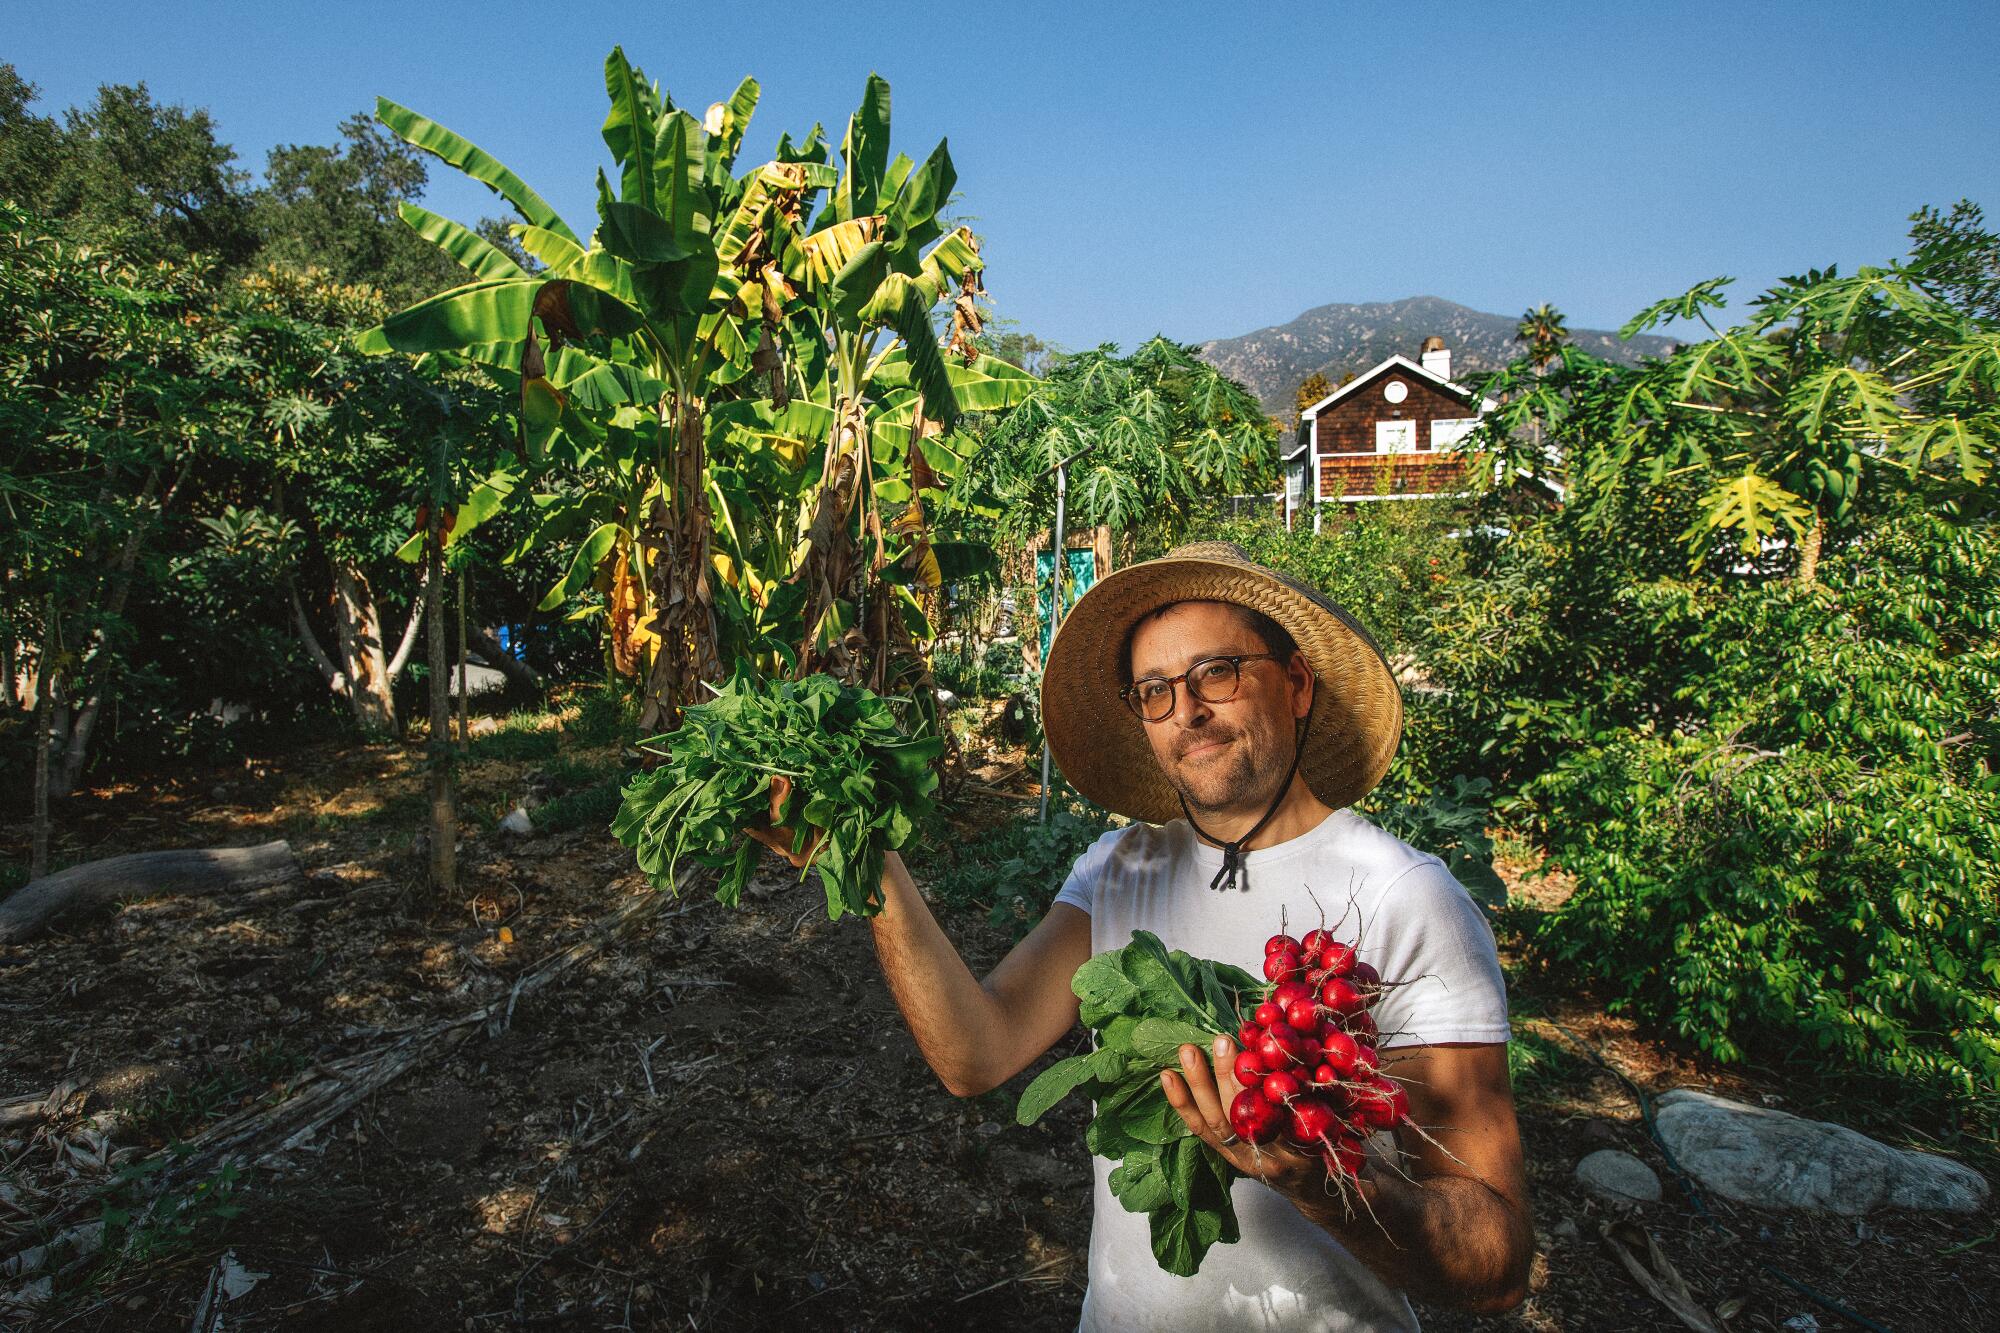 A man in a straw hat holds up hands-ful of vegetables at an urban farm, with a house and mountains behind him.